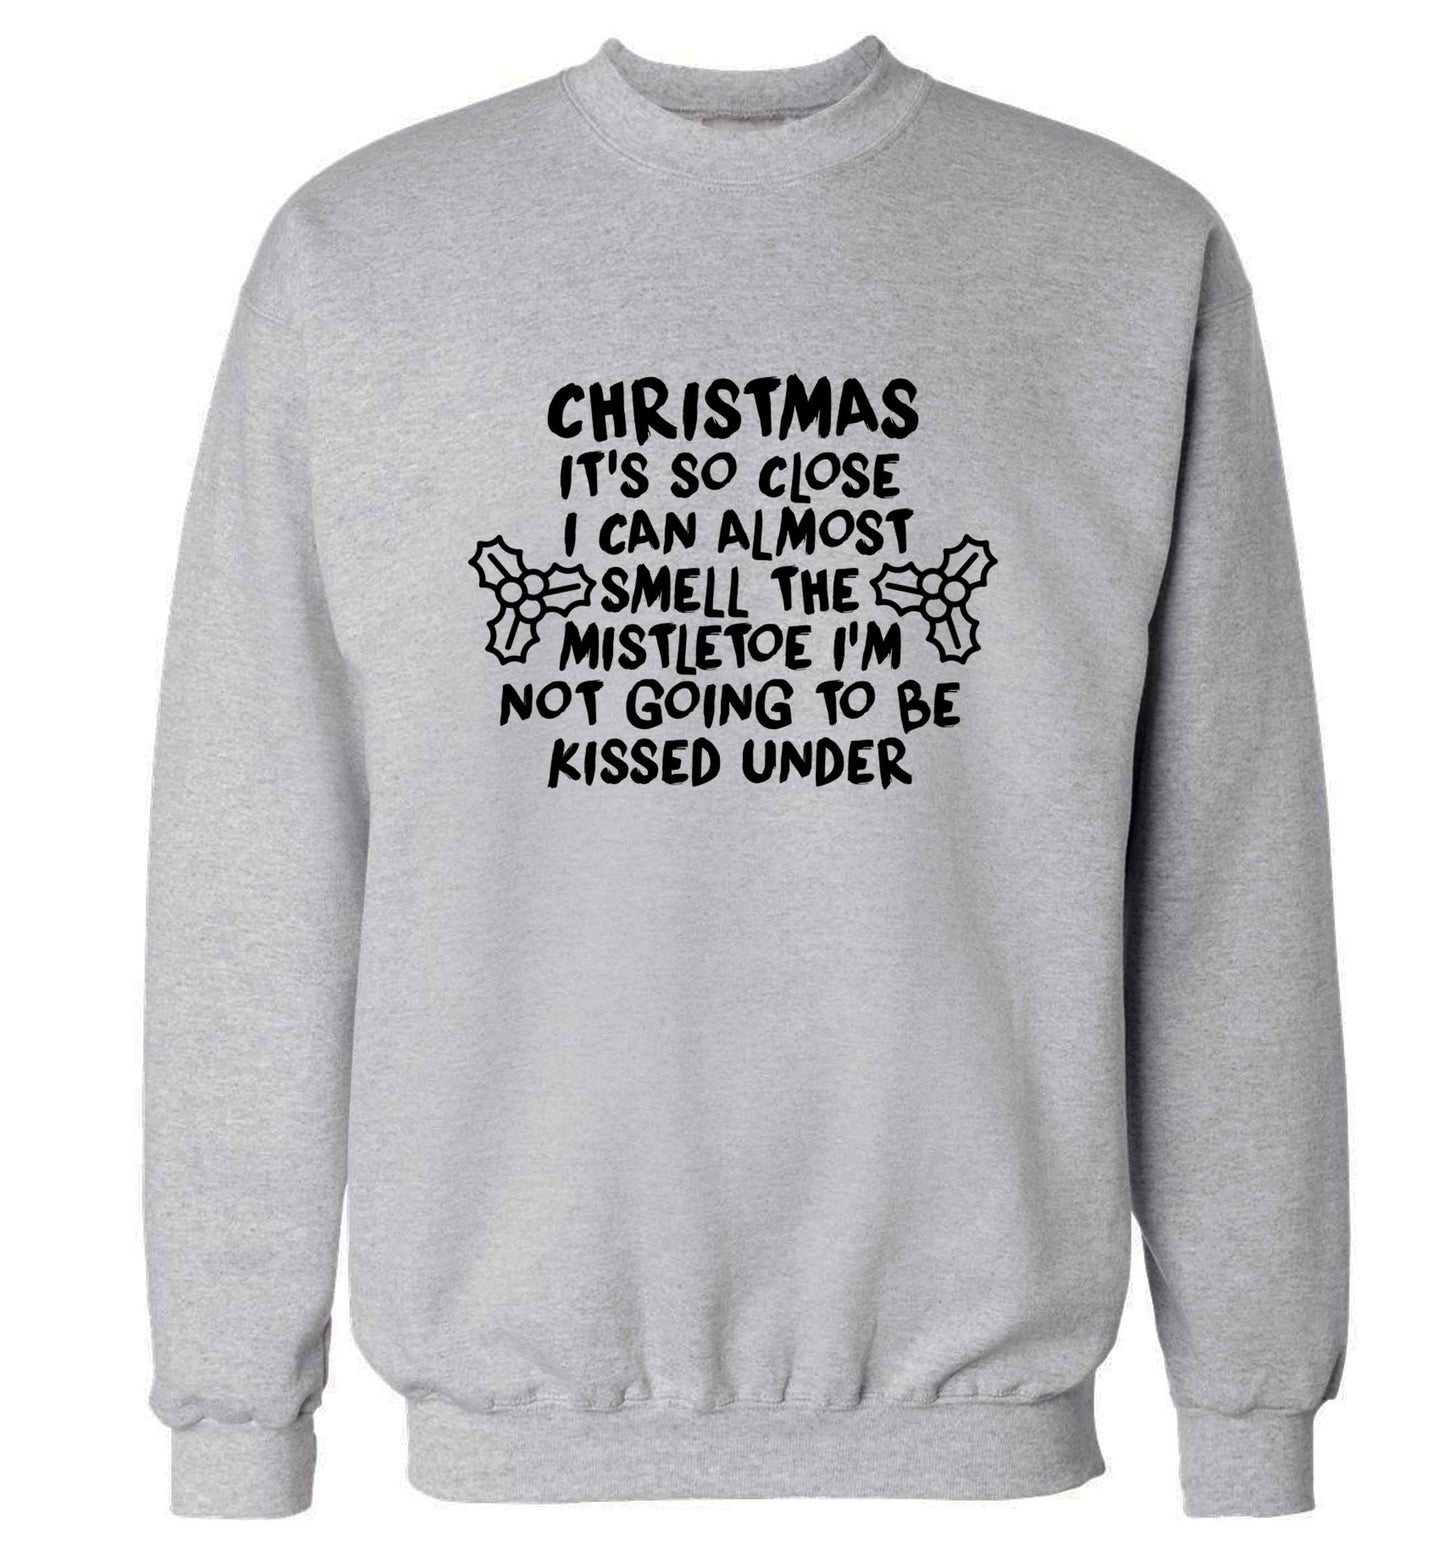 Christmas it's so close I can almost smell the misteltoe I'm not going to be kissed under adult's unisex grey sweater 2XL